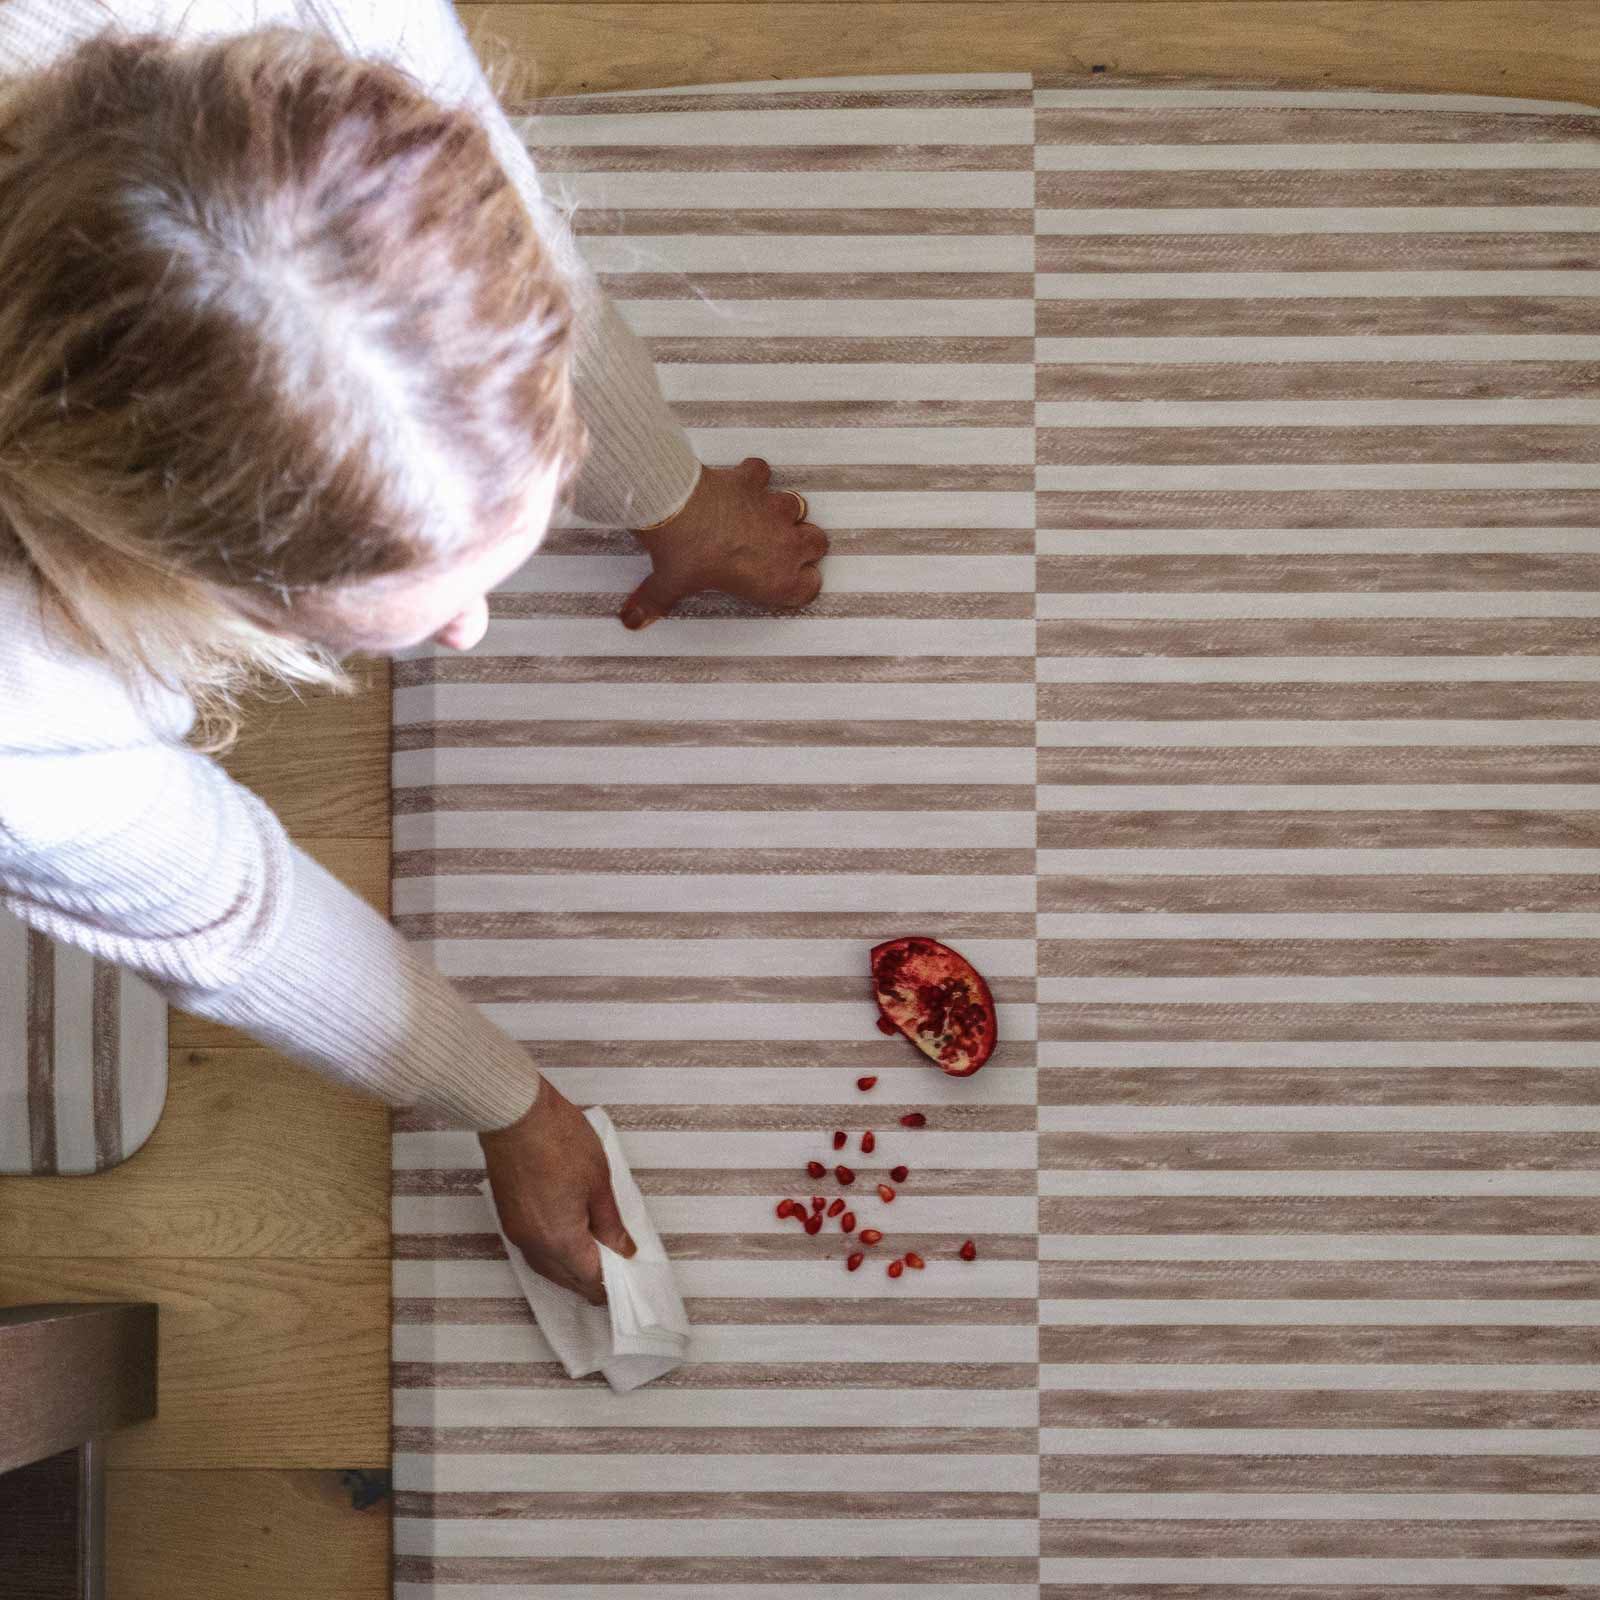 Reese chai beige and white inverted stripe standing mat shown from above with woman wiping up a spill